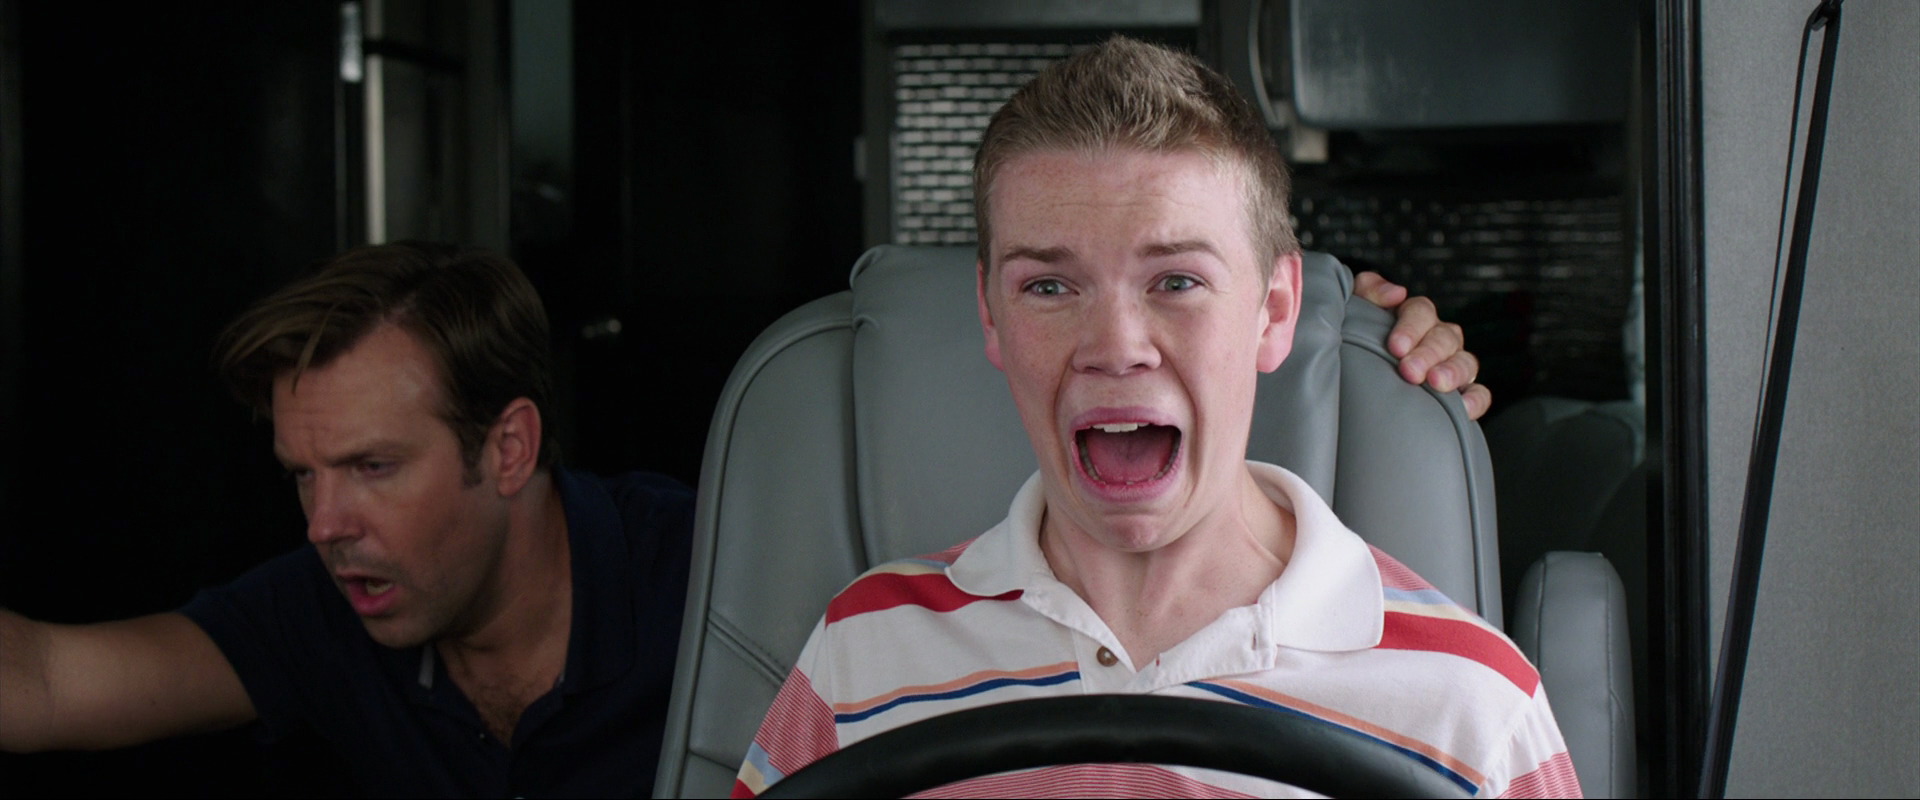 Screen Captures - were-the-millers-1425 - Will Poulter Photo Gallery.